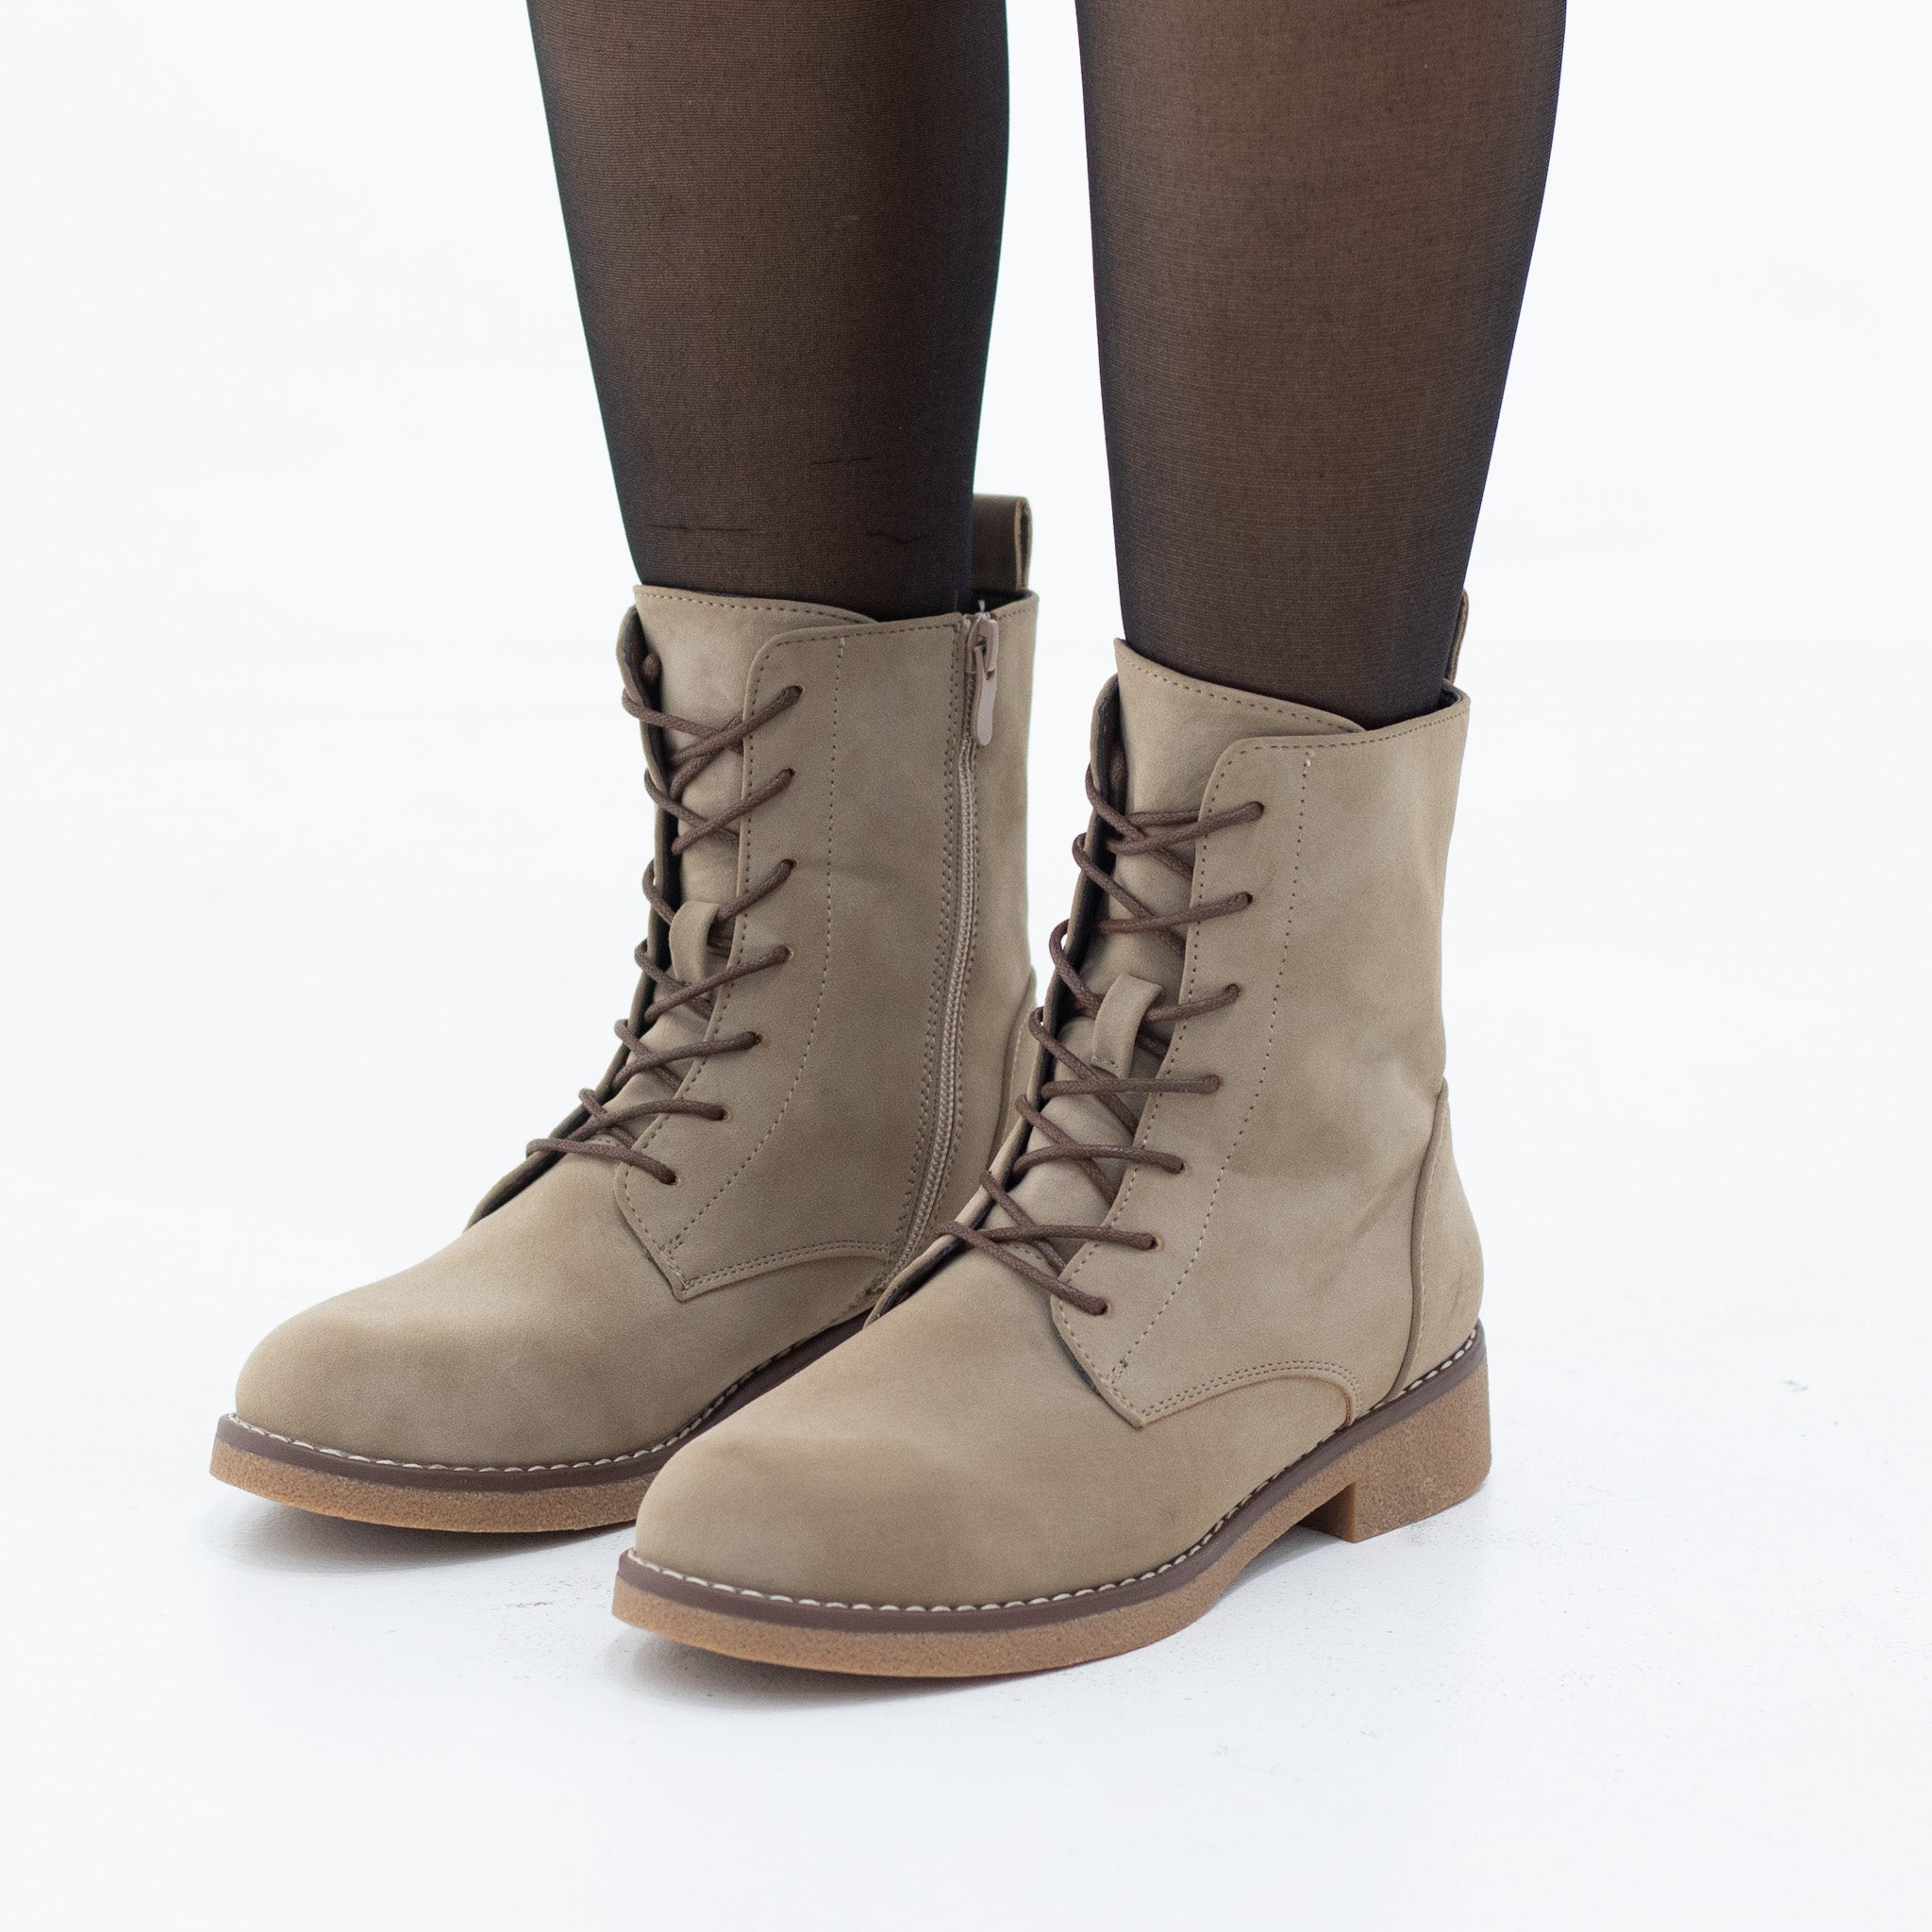 Cancer suede lace up super mode 3.5cm heel ankle boot khaki